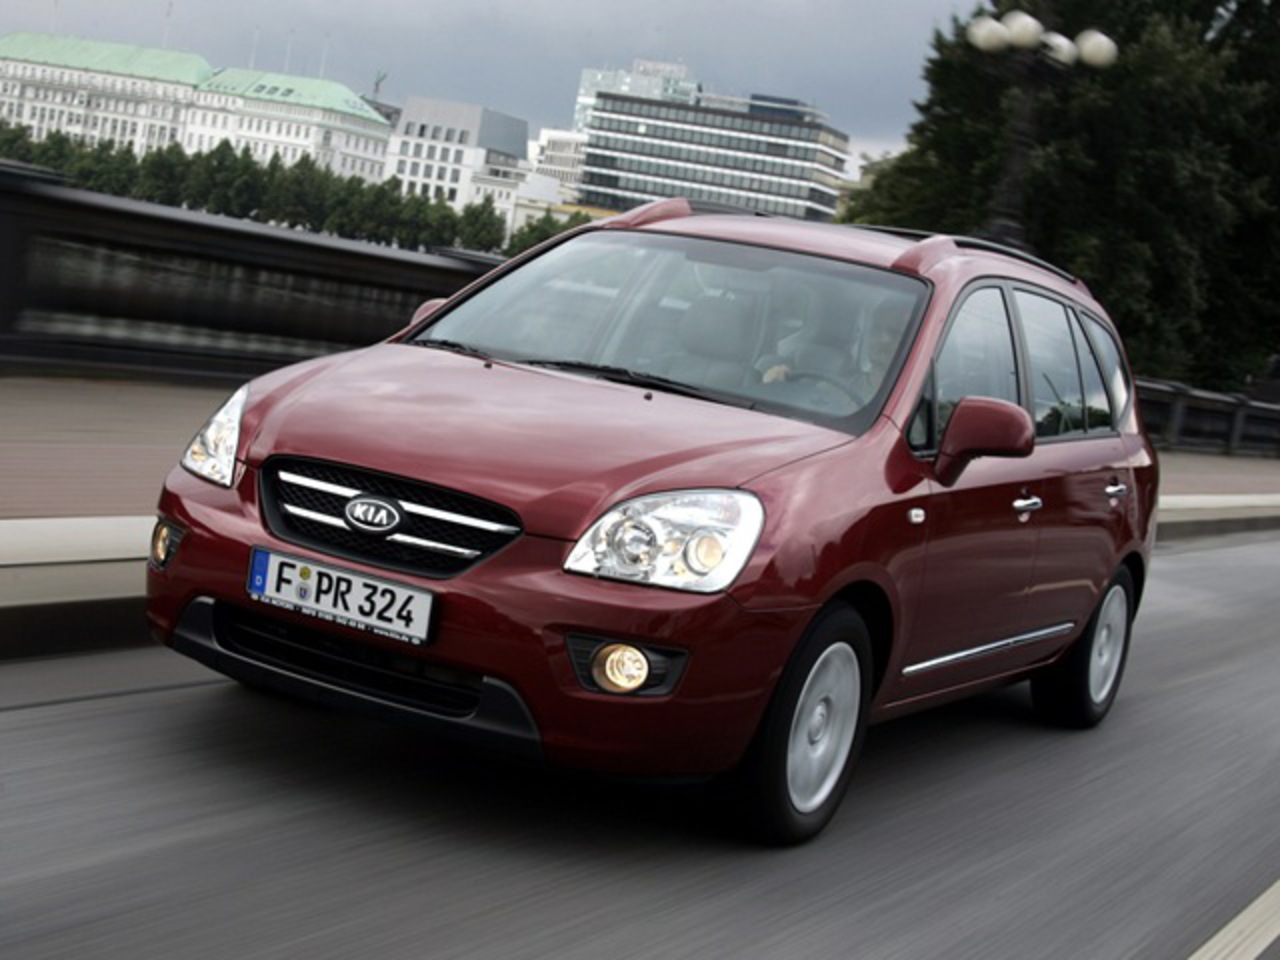 kia carens ii related images,451 to 500 - Zuoda Images